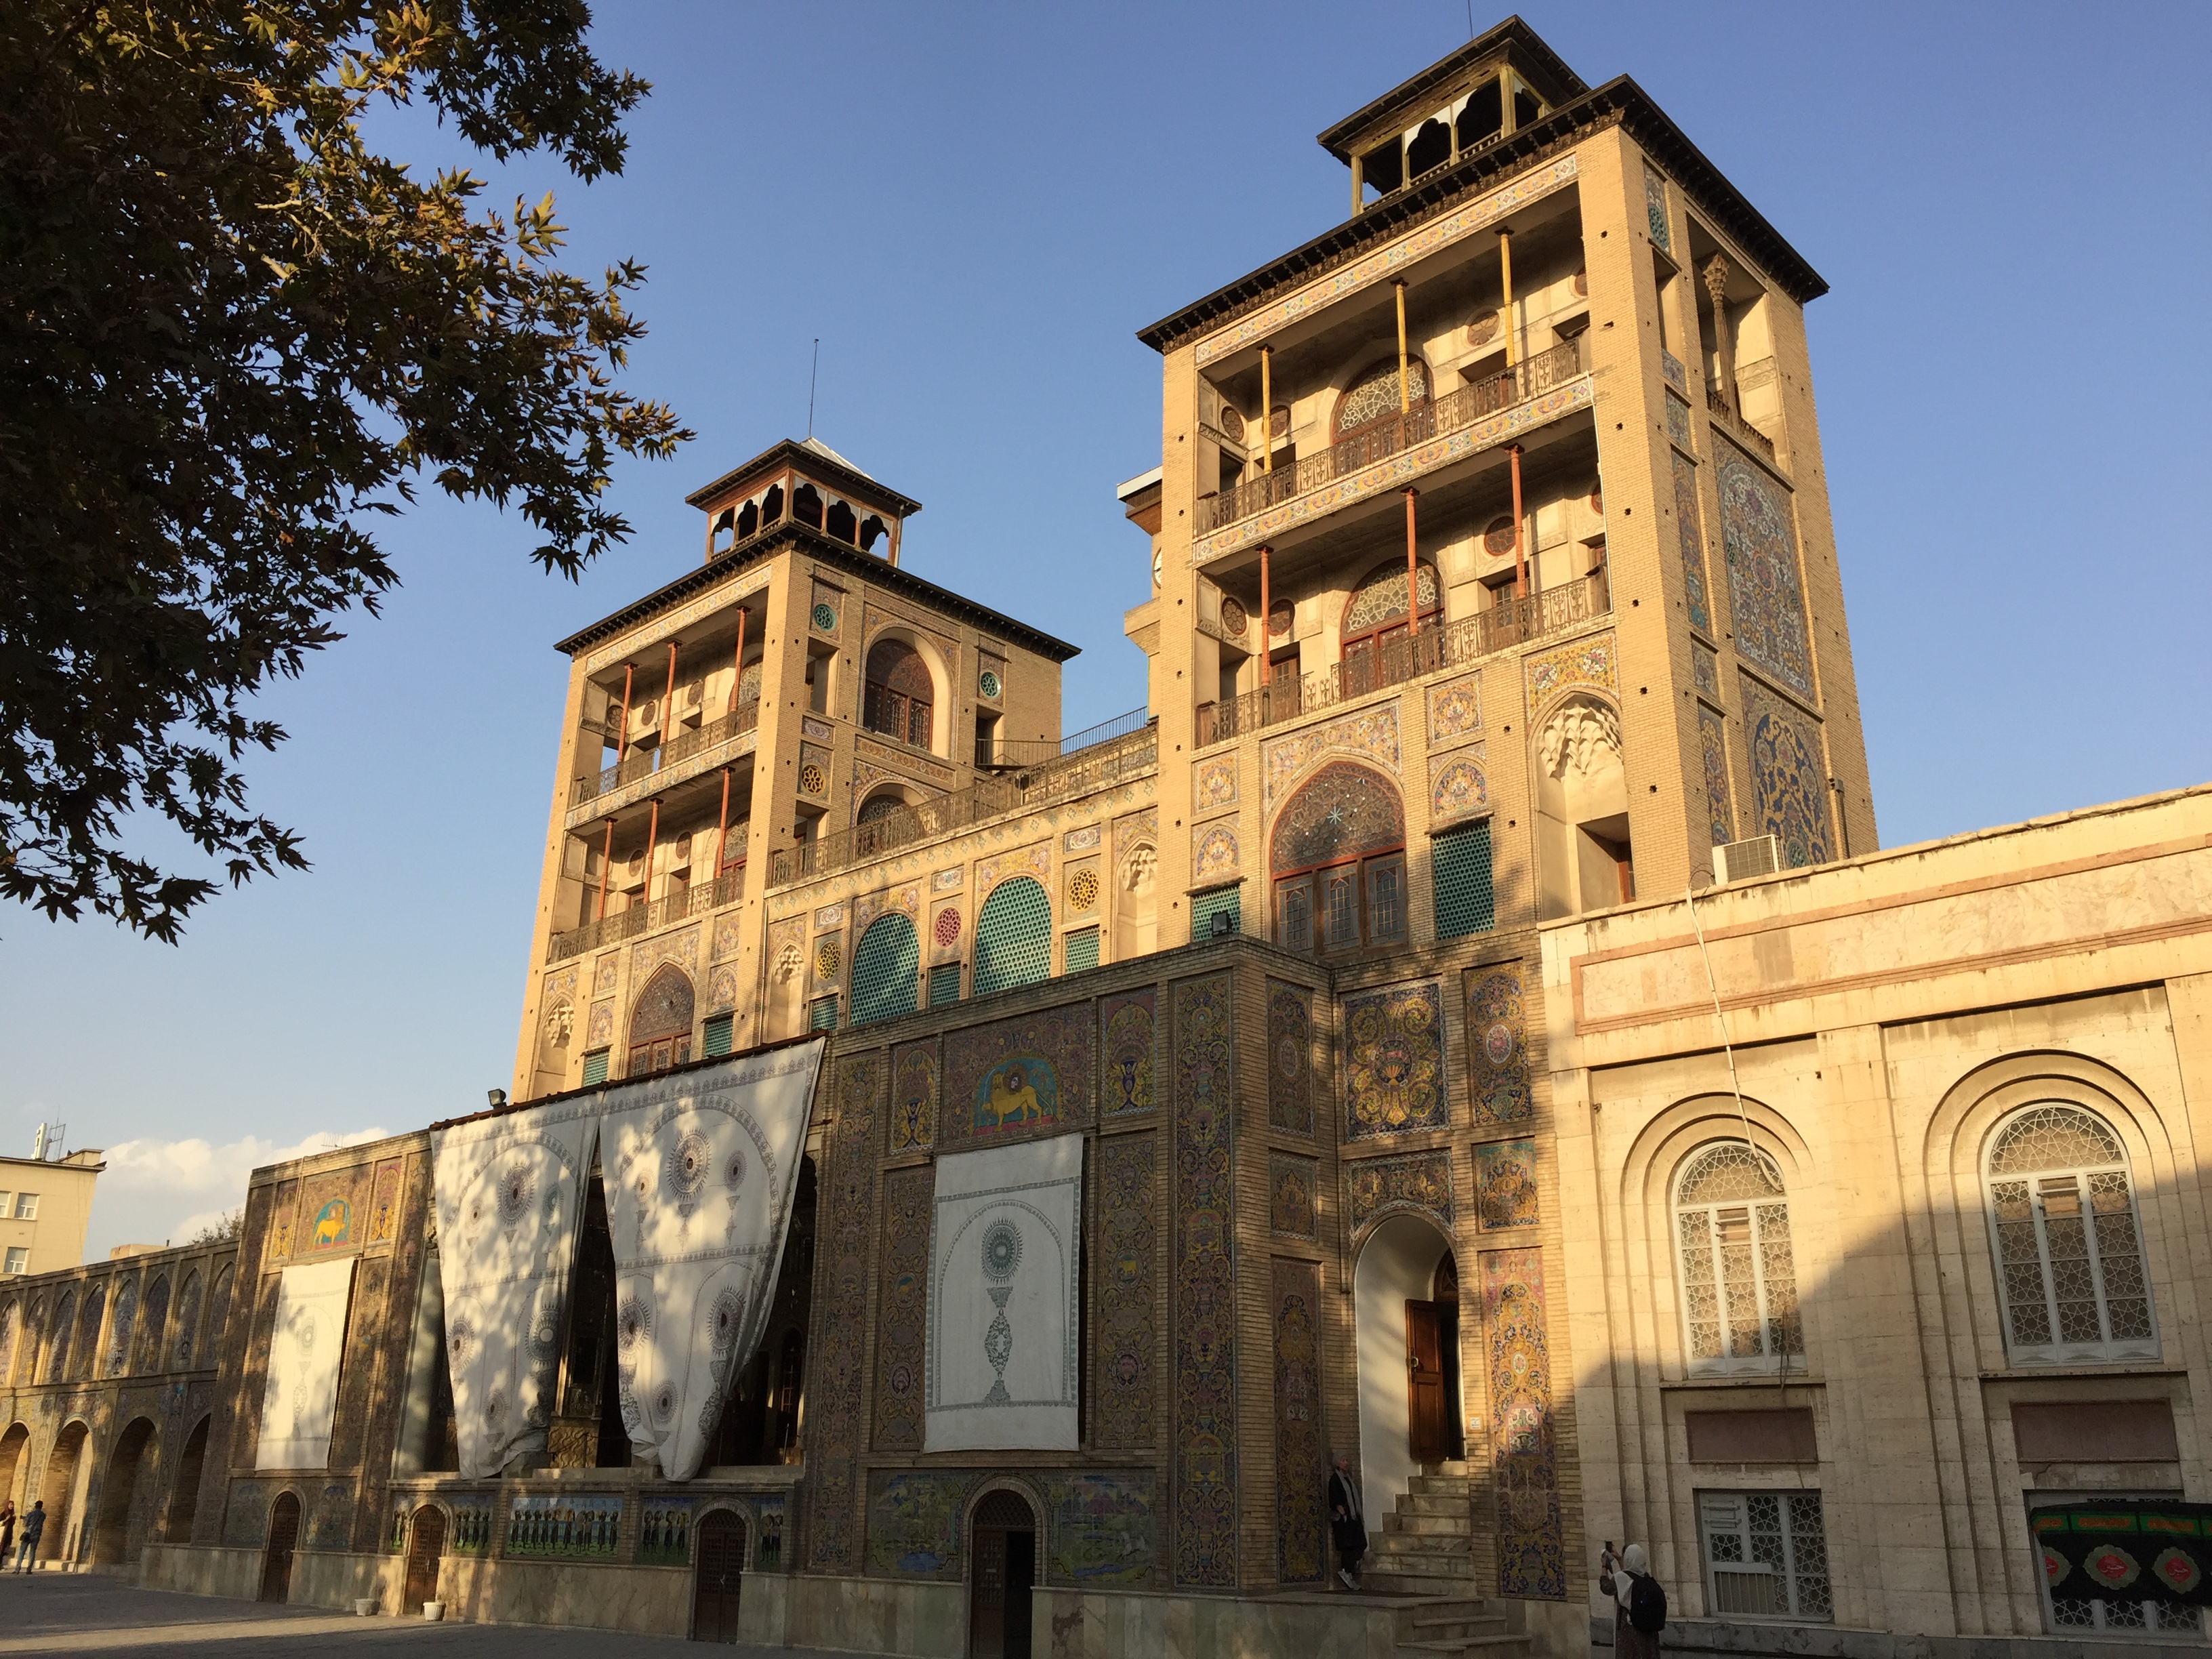 Sham ol Emareh (Edifice of the Sun) building of Tehran's Golestan Palace a main attraction of the UNESCO World Heritage Site